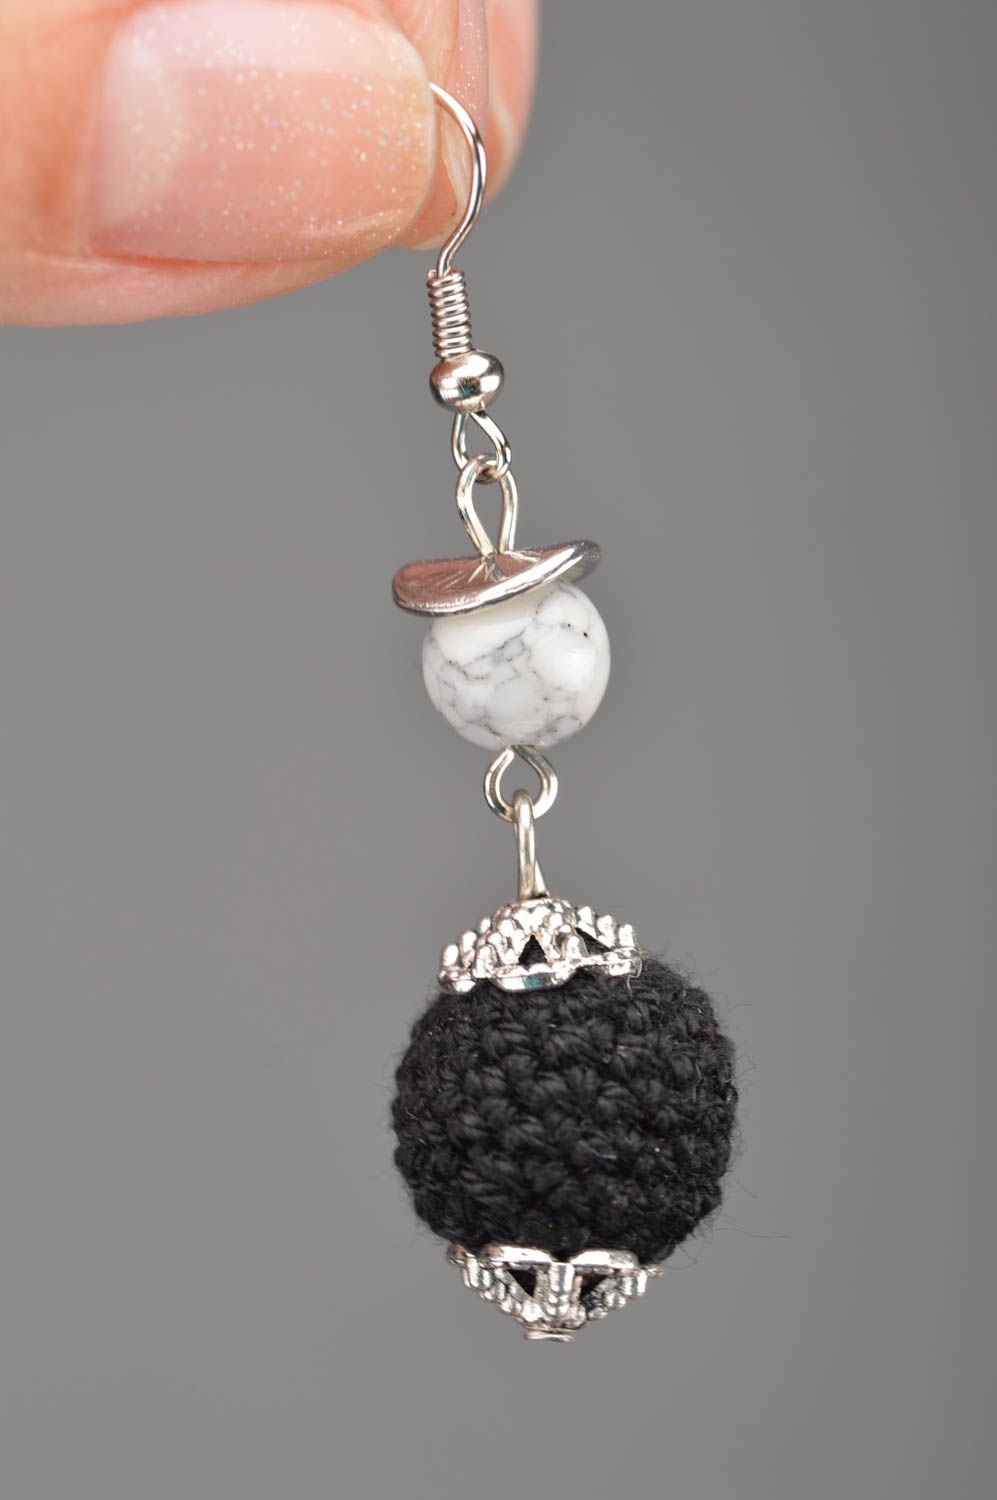 Unusual beautiful handmade earrings with crocheted over beads black and white photo 2